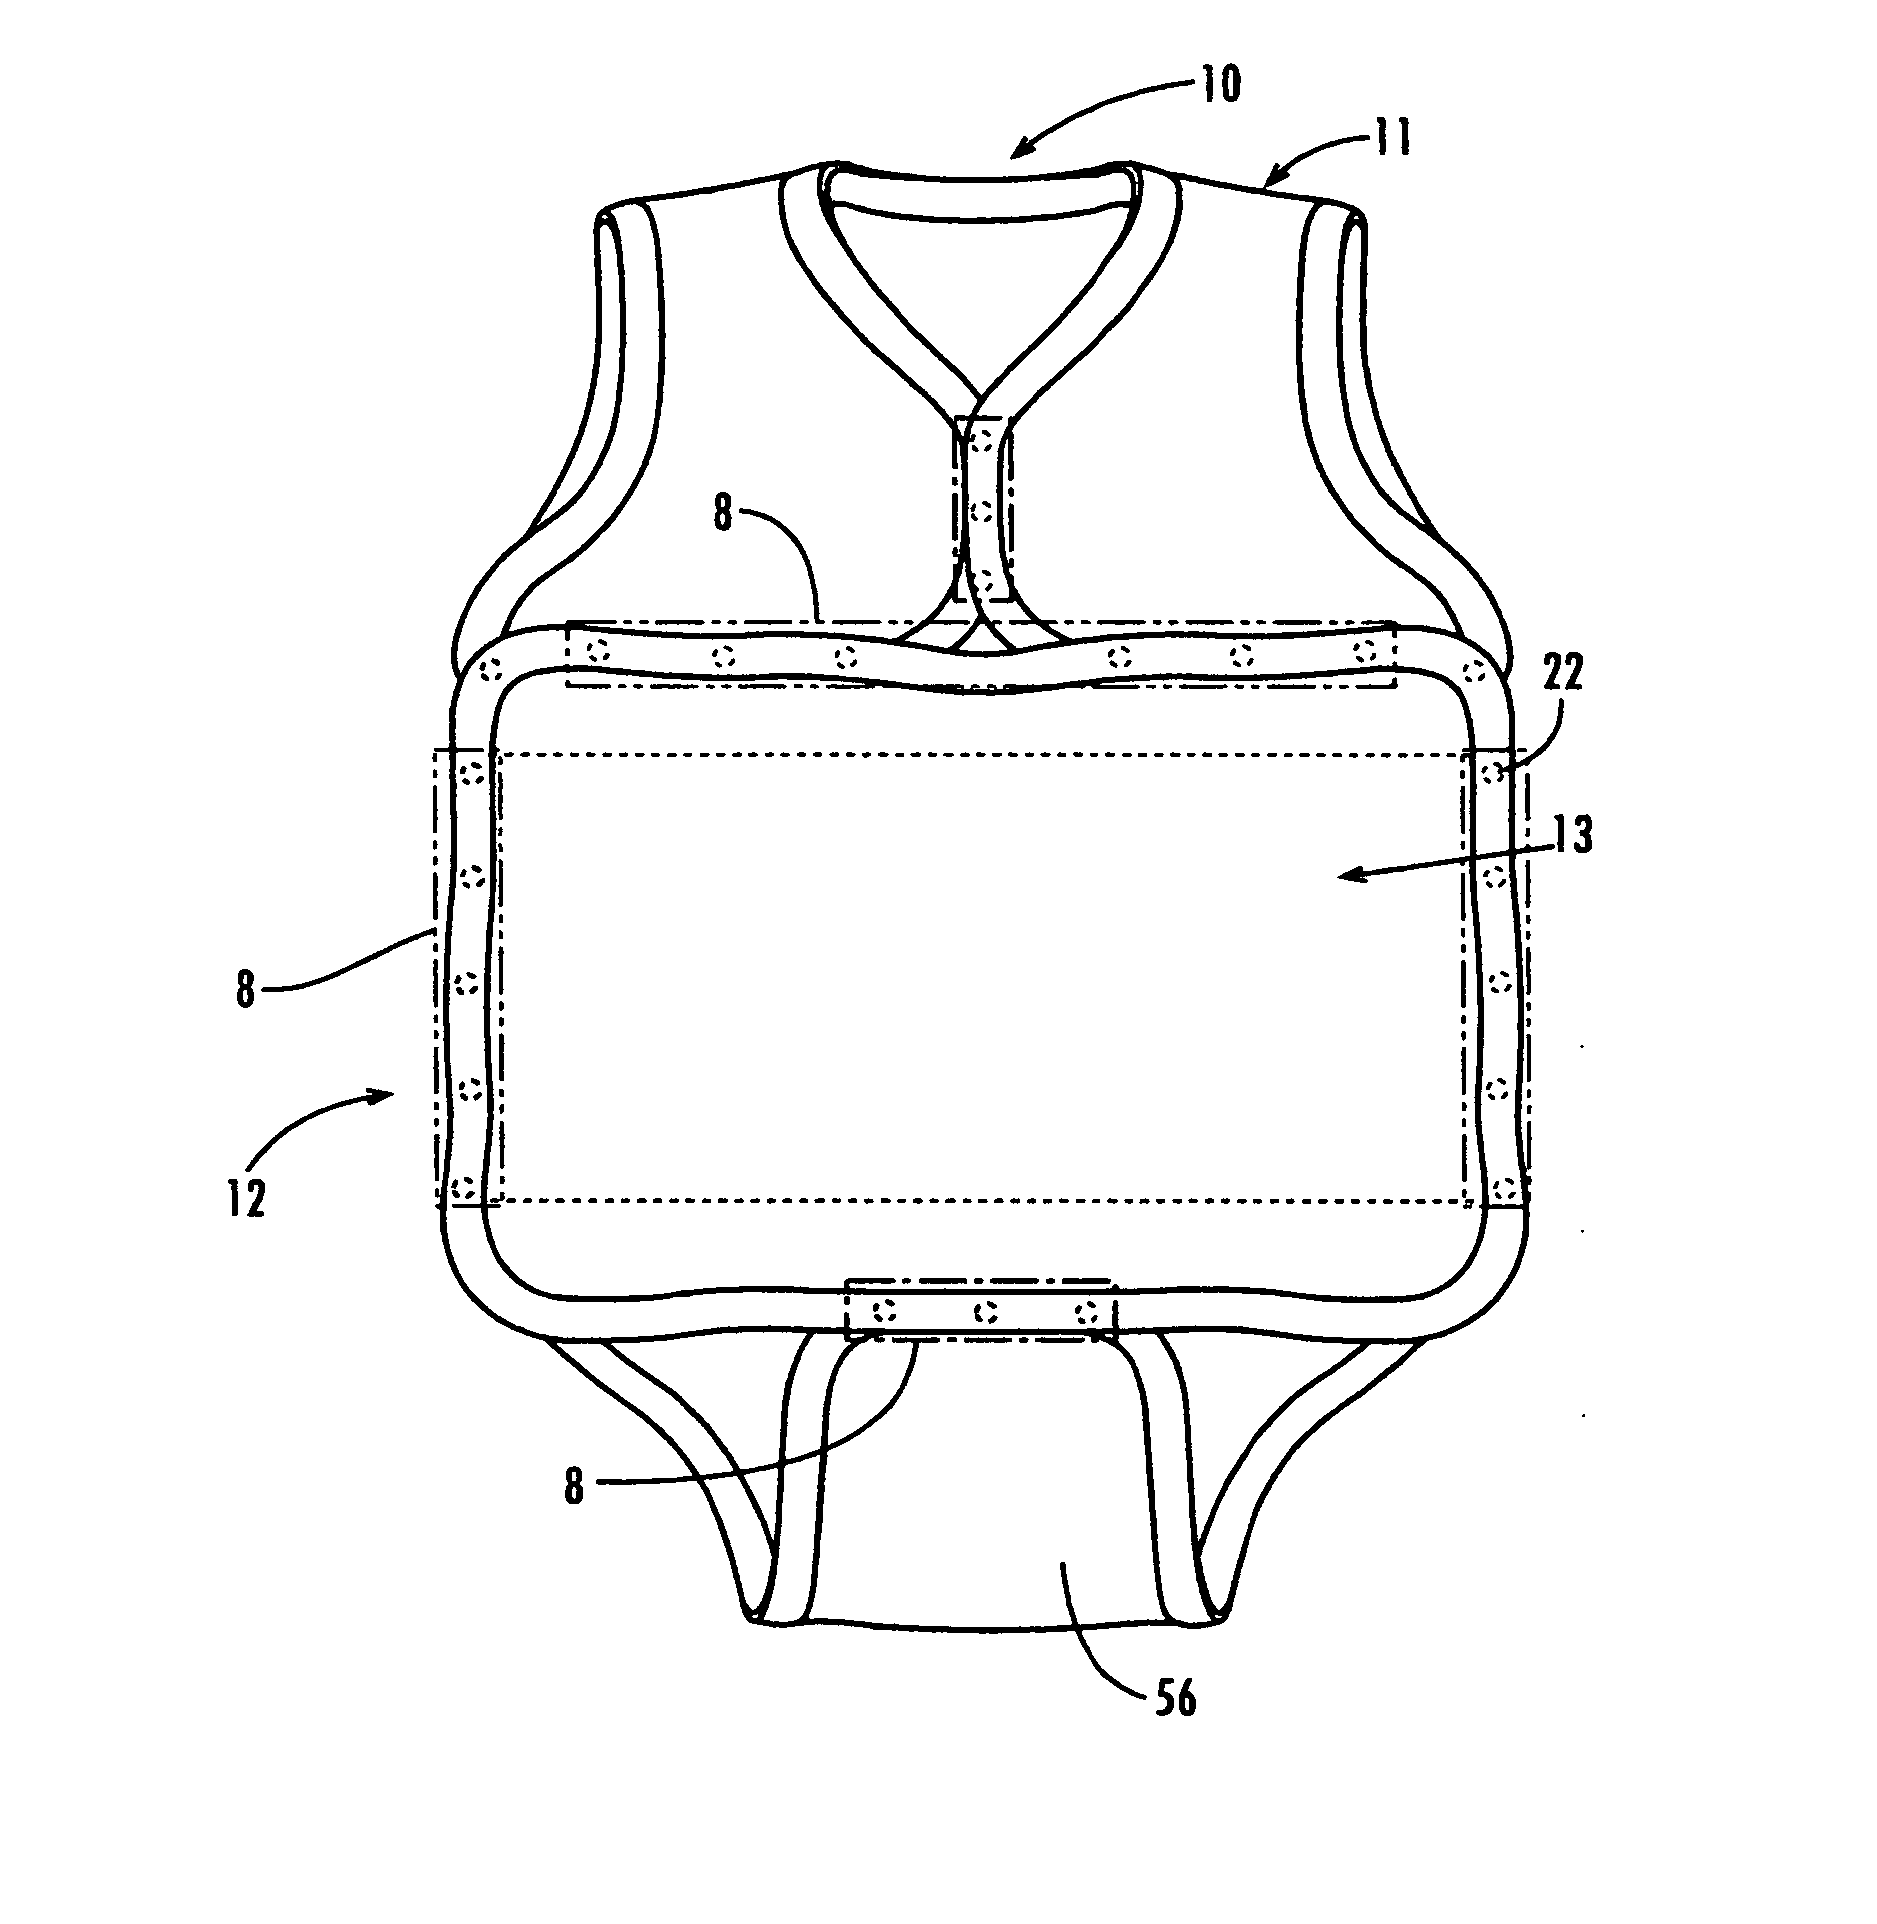 Garment for accomodating medical devices